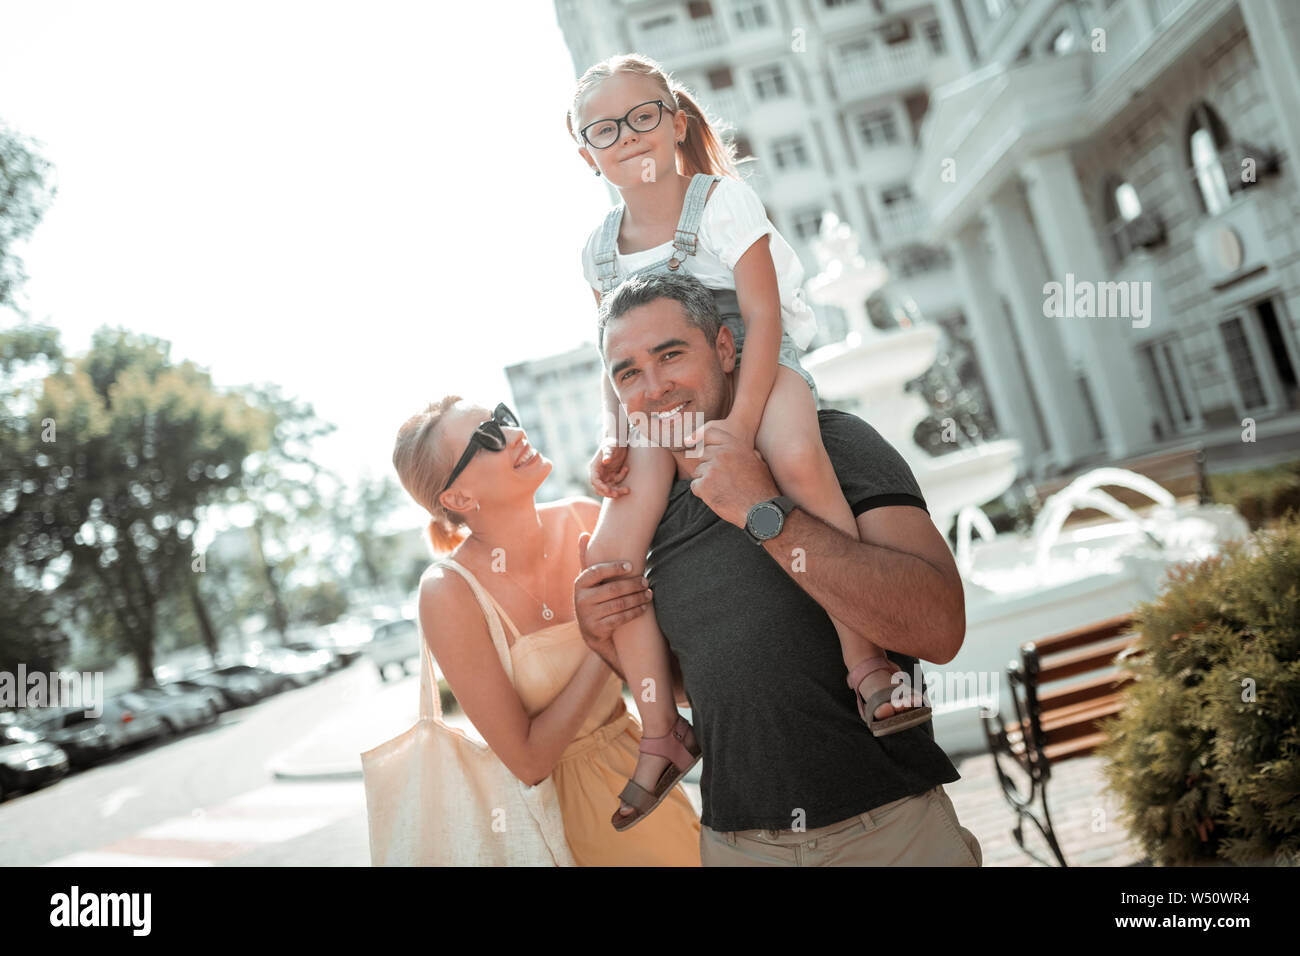 High spirits. Cheerful little girl riding her smiling fathers shoulders with her mother standing behind her. Stock Photo